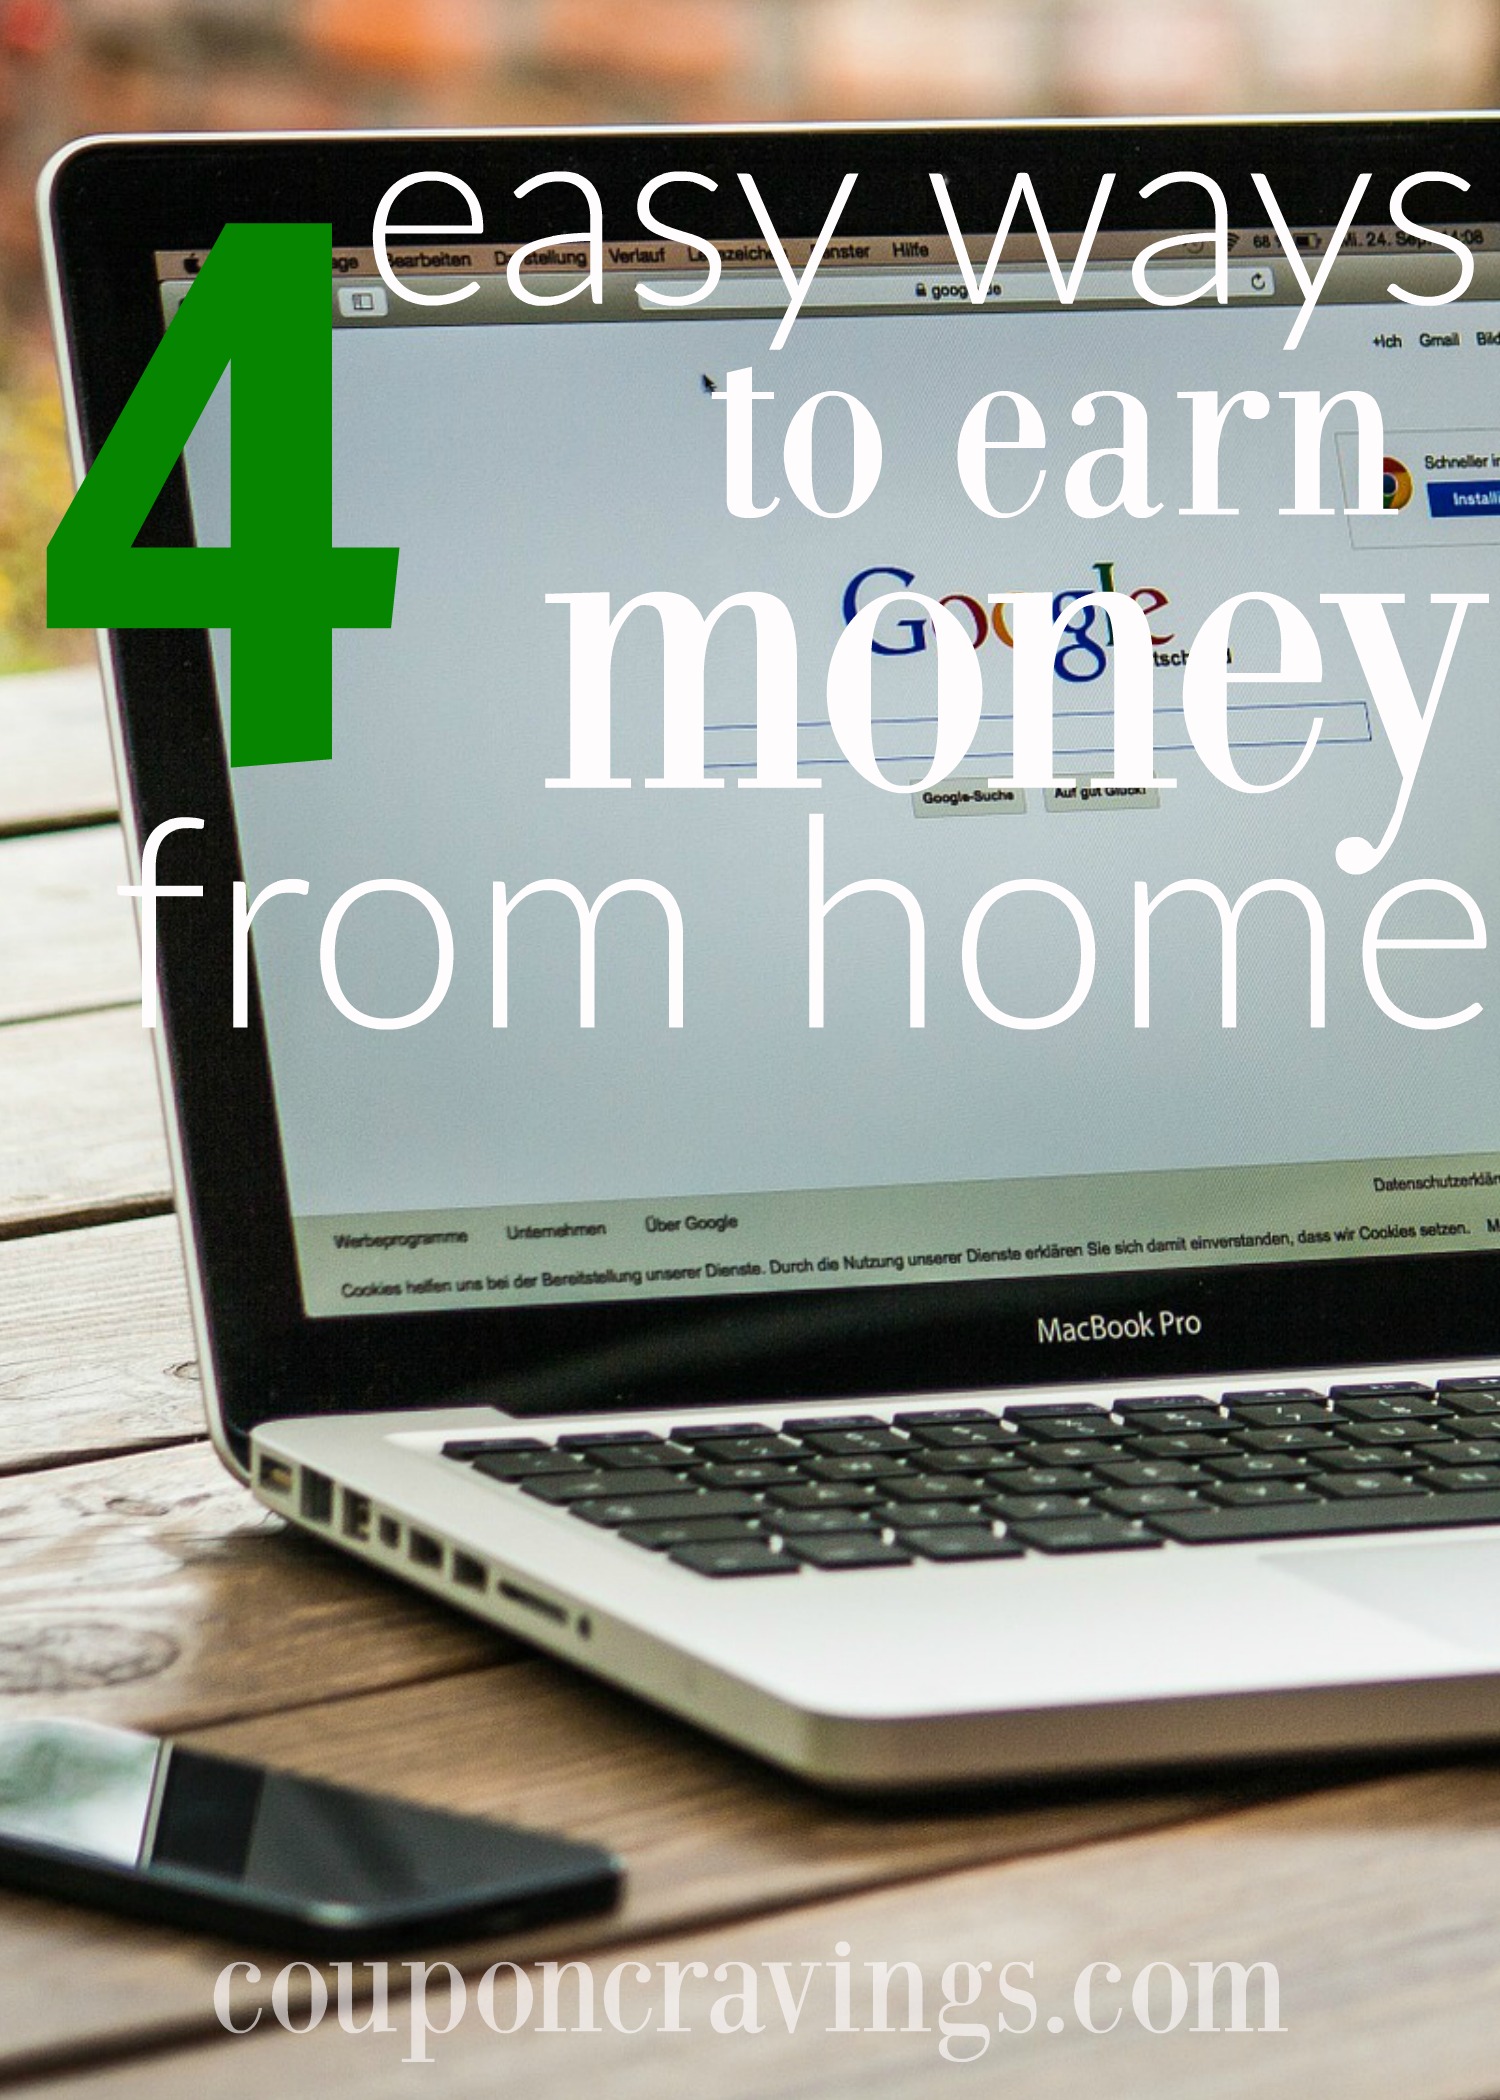 Make money online with these four easy options. My favorite is Mystery Shopping, a simple way to make up to $100 extra per week. And, over five of the top survey companies to earn cash online, too. https://couponcravings.com/